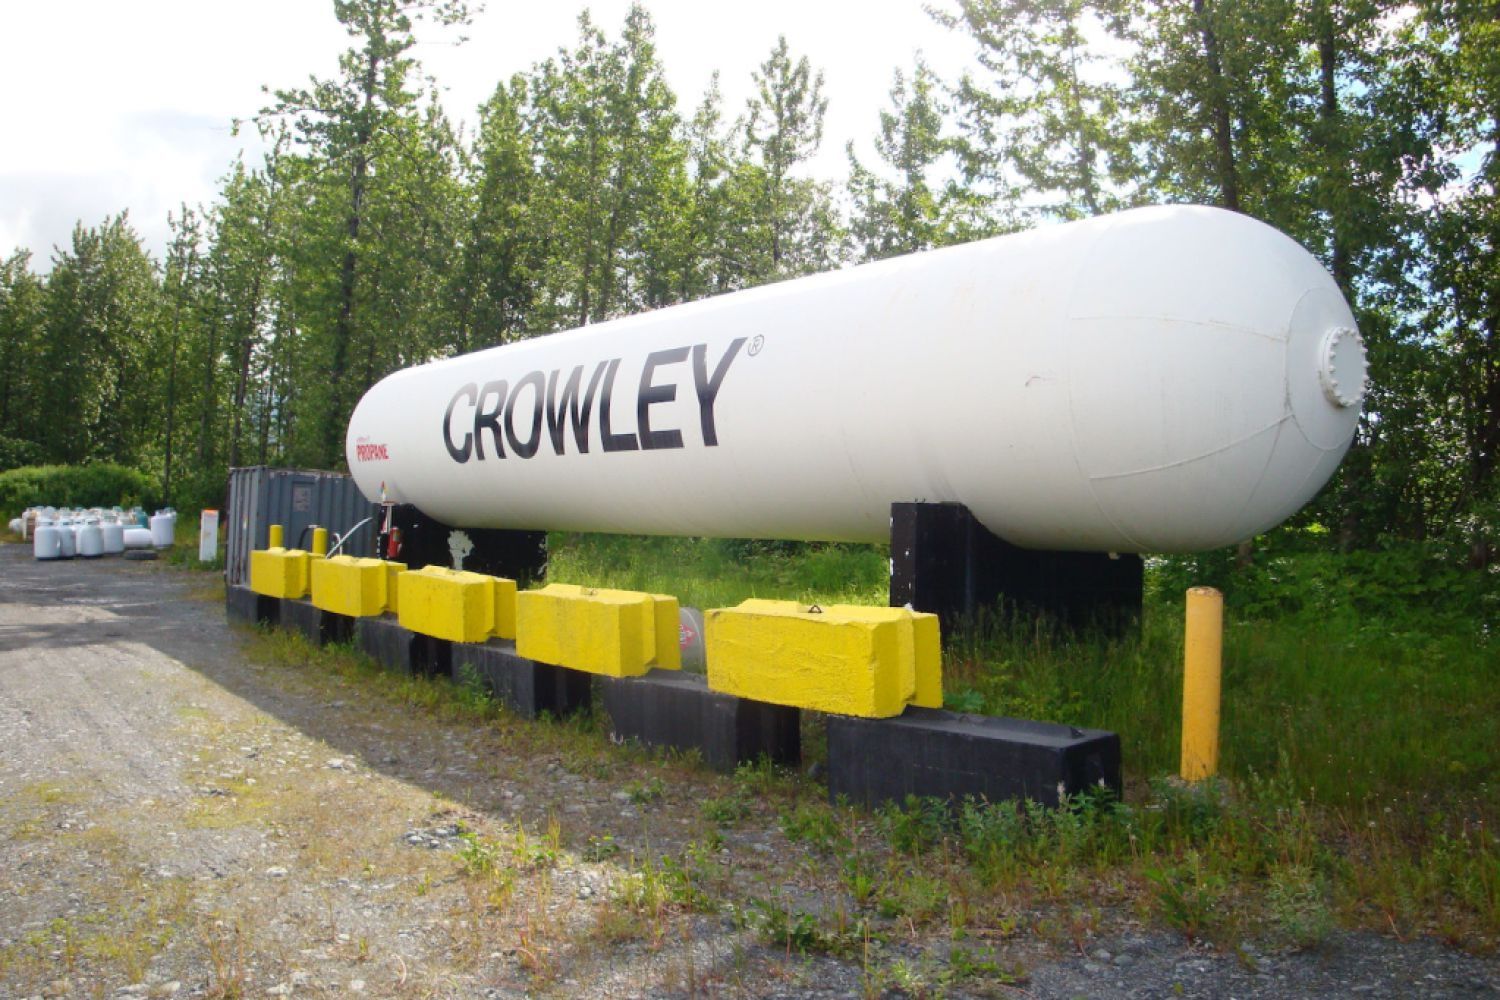 crowley fuels commercial featured